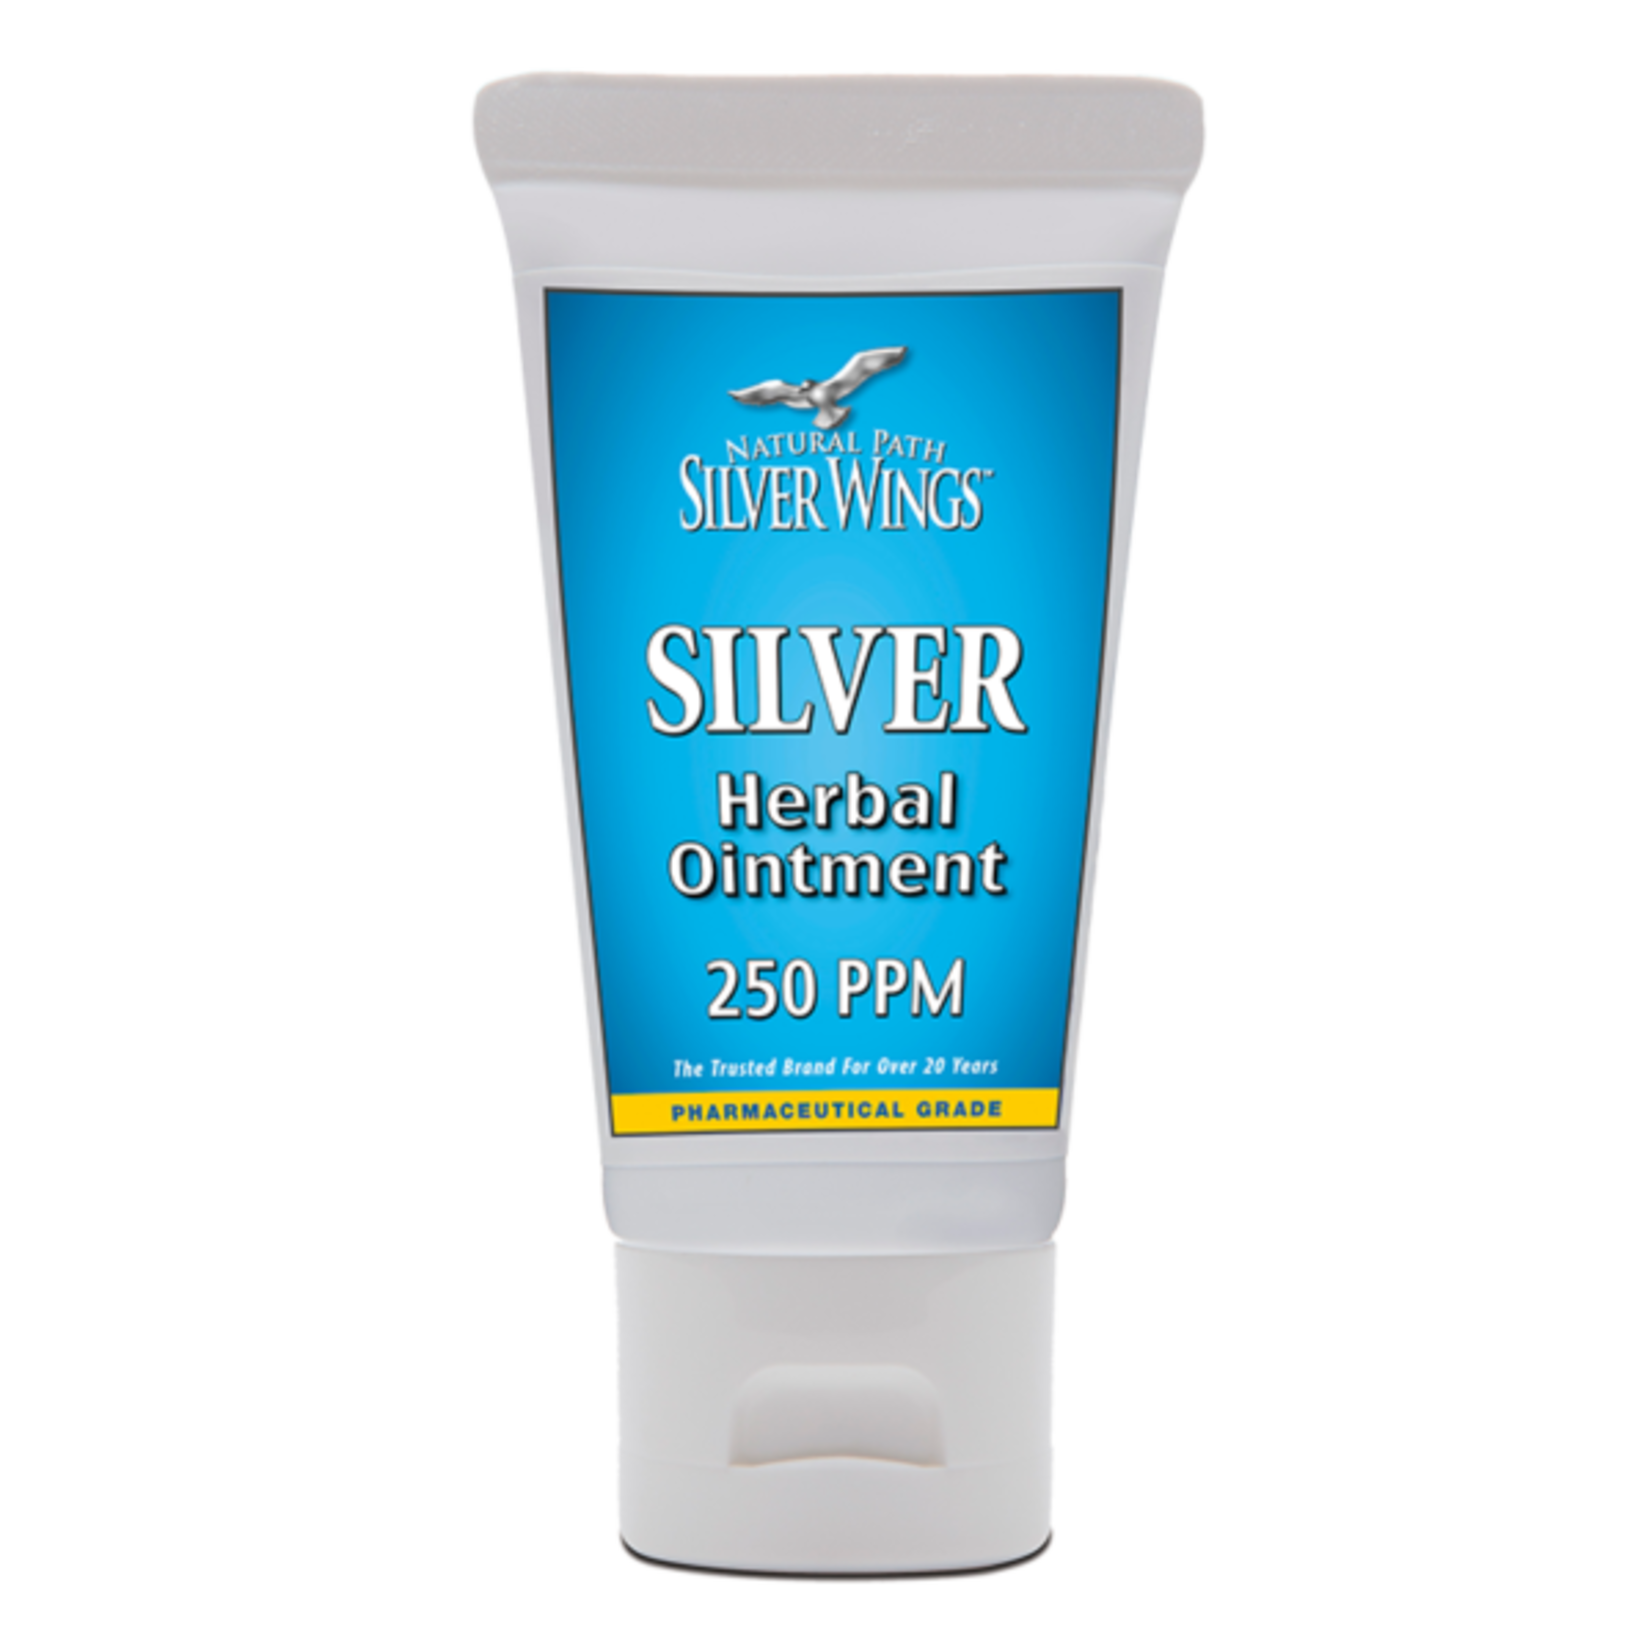 Natural Path Silver Wings Natural Path Silver Wings - Silver Herbal Ointment 250PPM - .75 oz